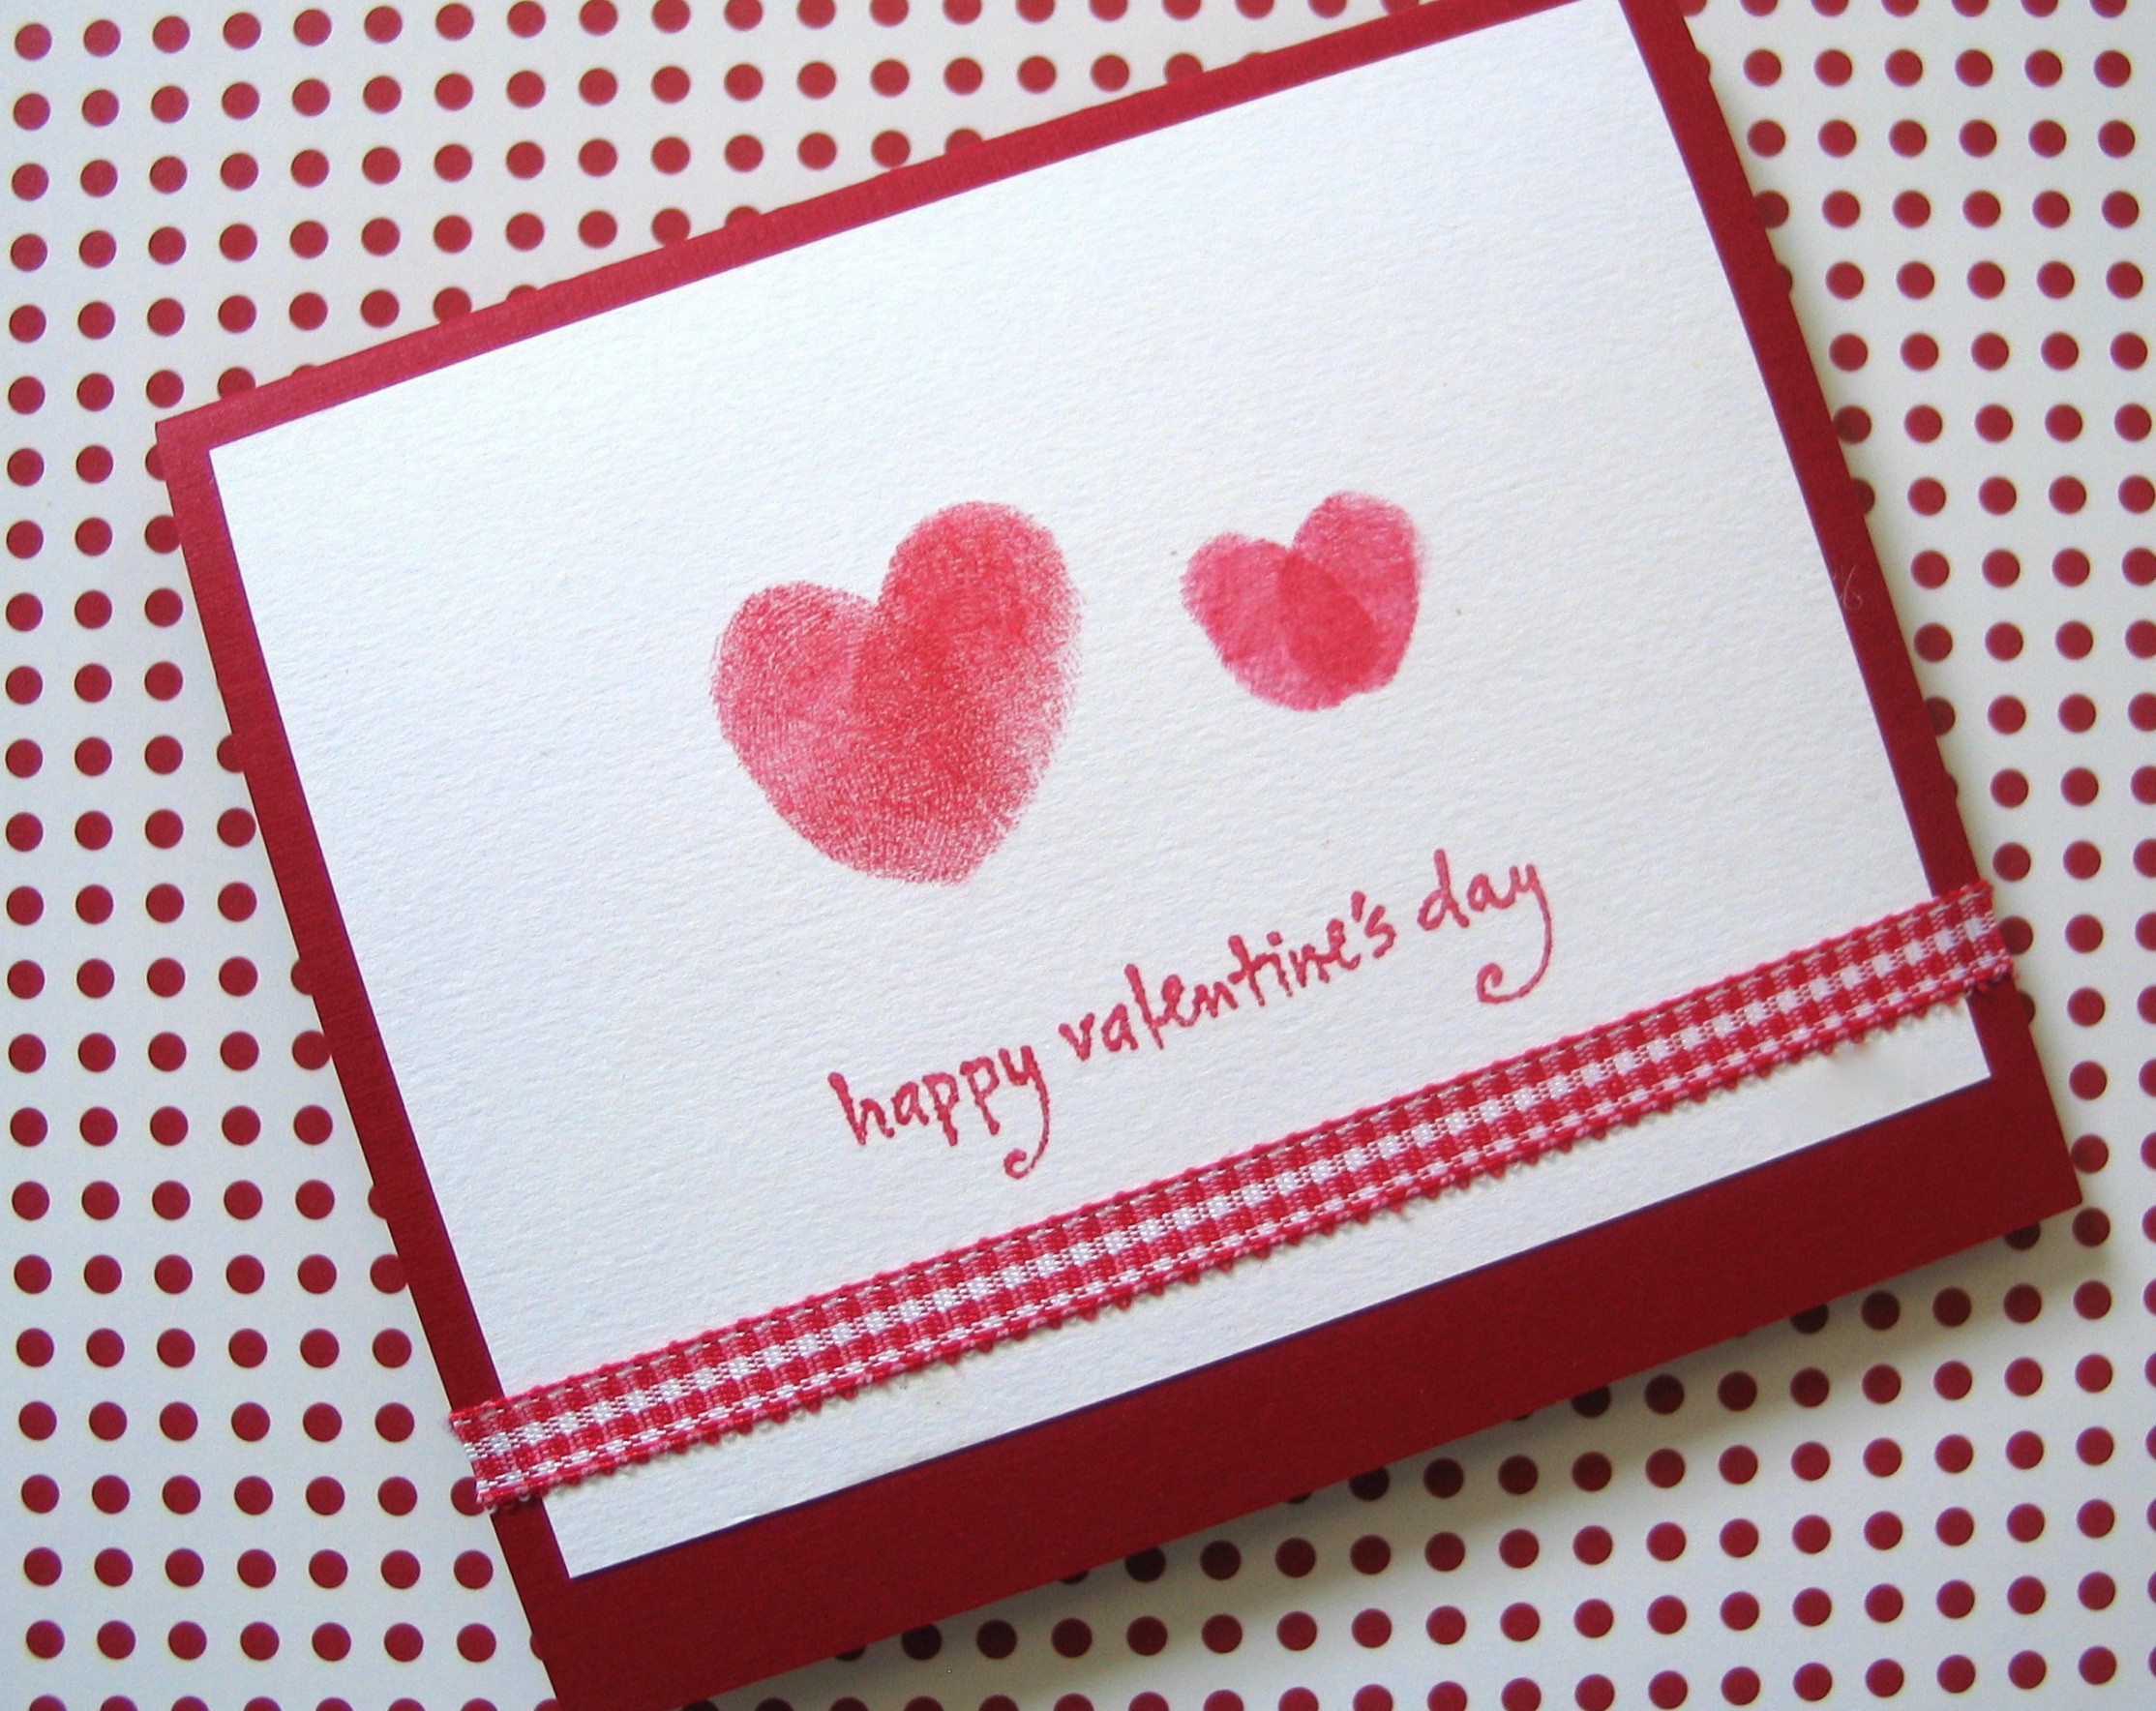 Cute Valentines Day Card Ideas
 The 17 Cutest Things to Do With Your Boyfriend on